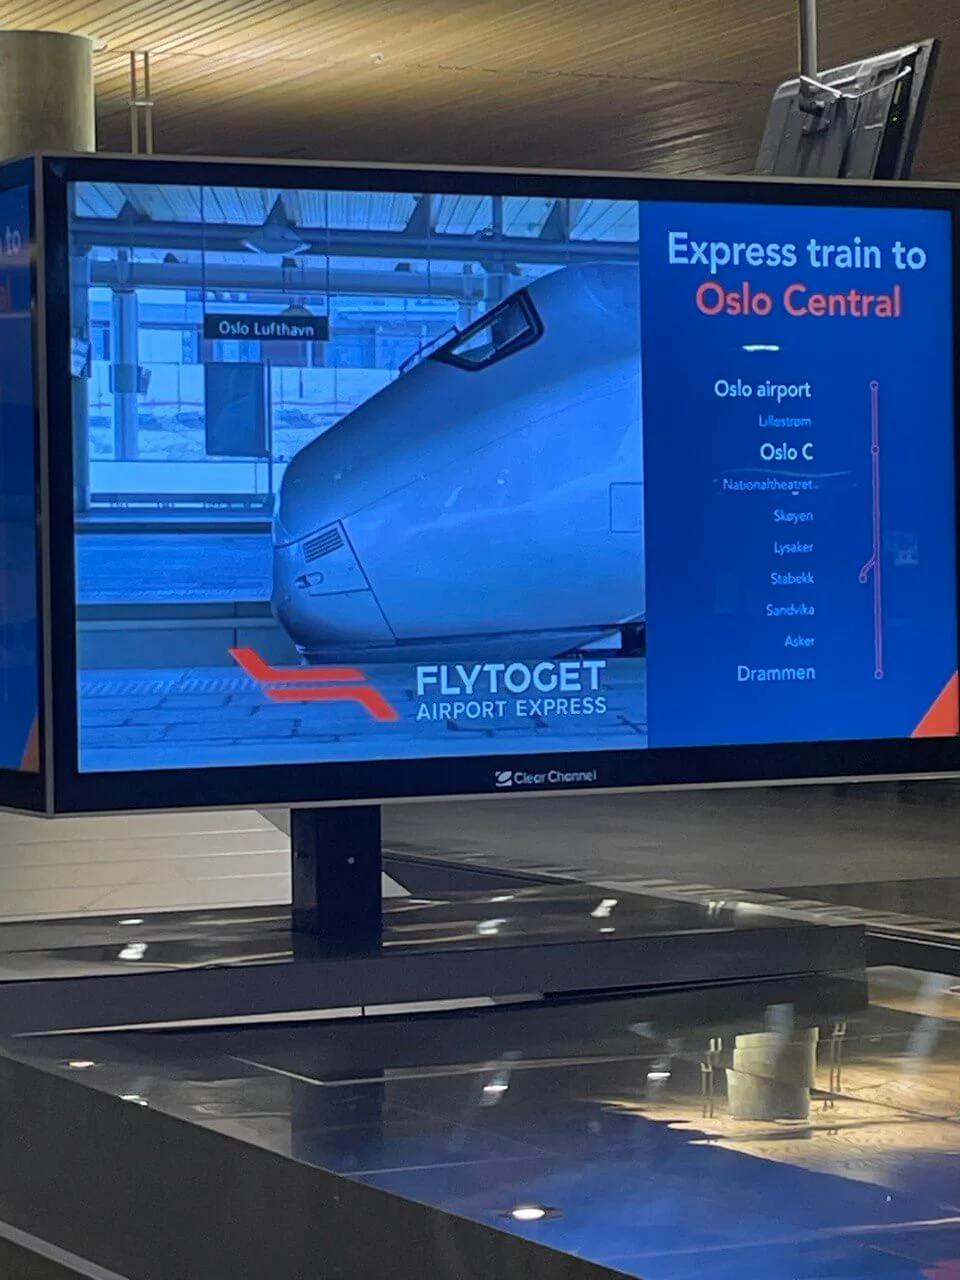 Flytoget Oslo airport express train